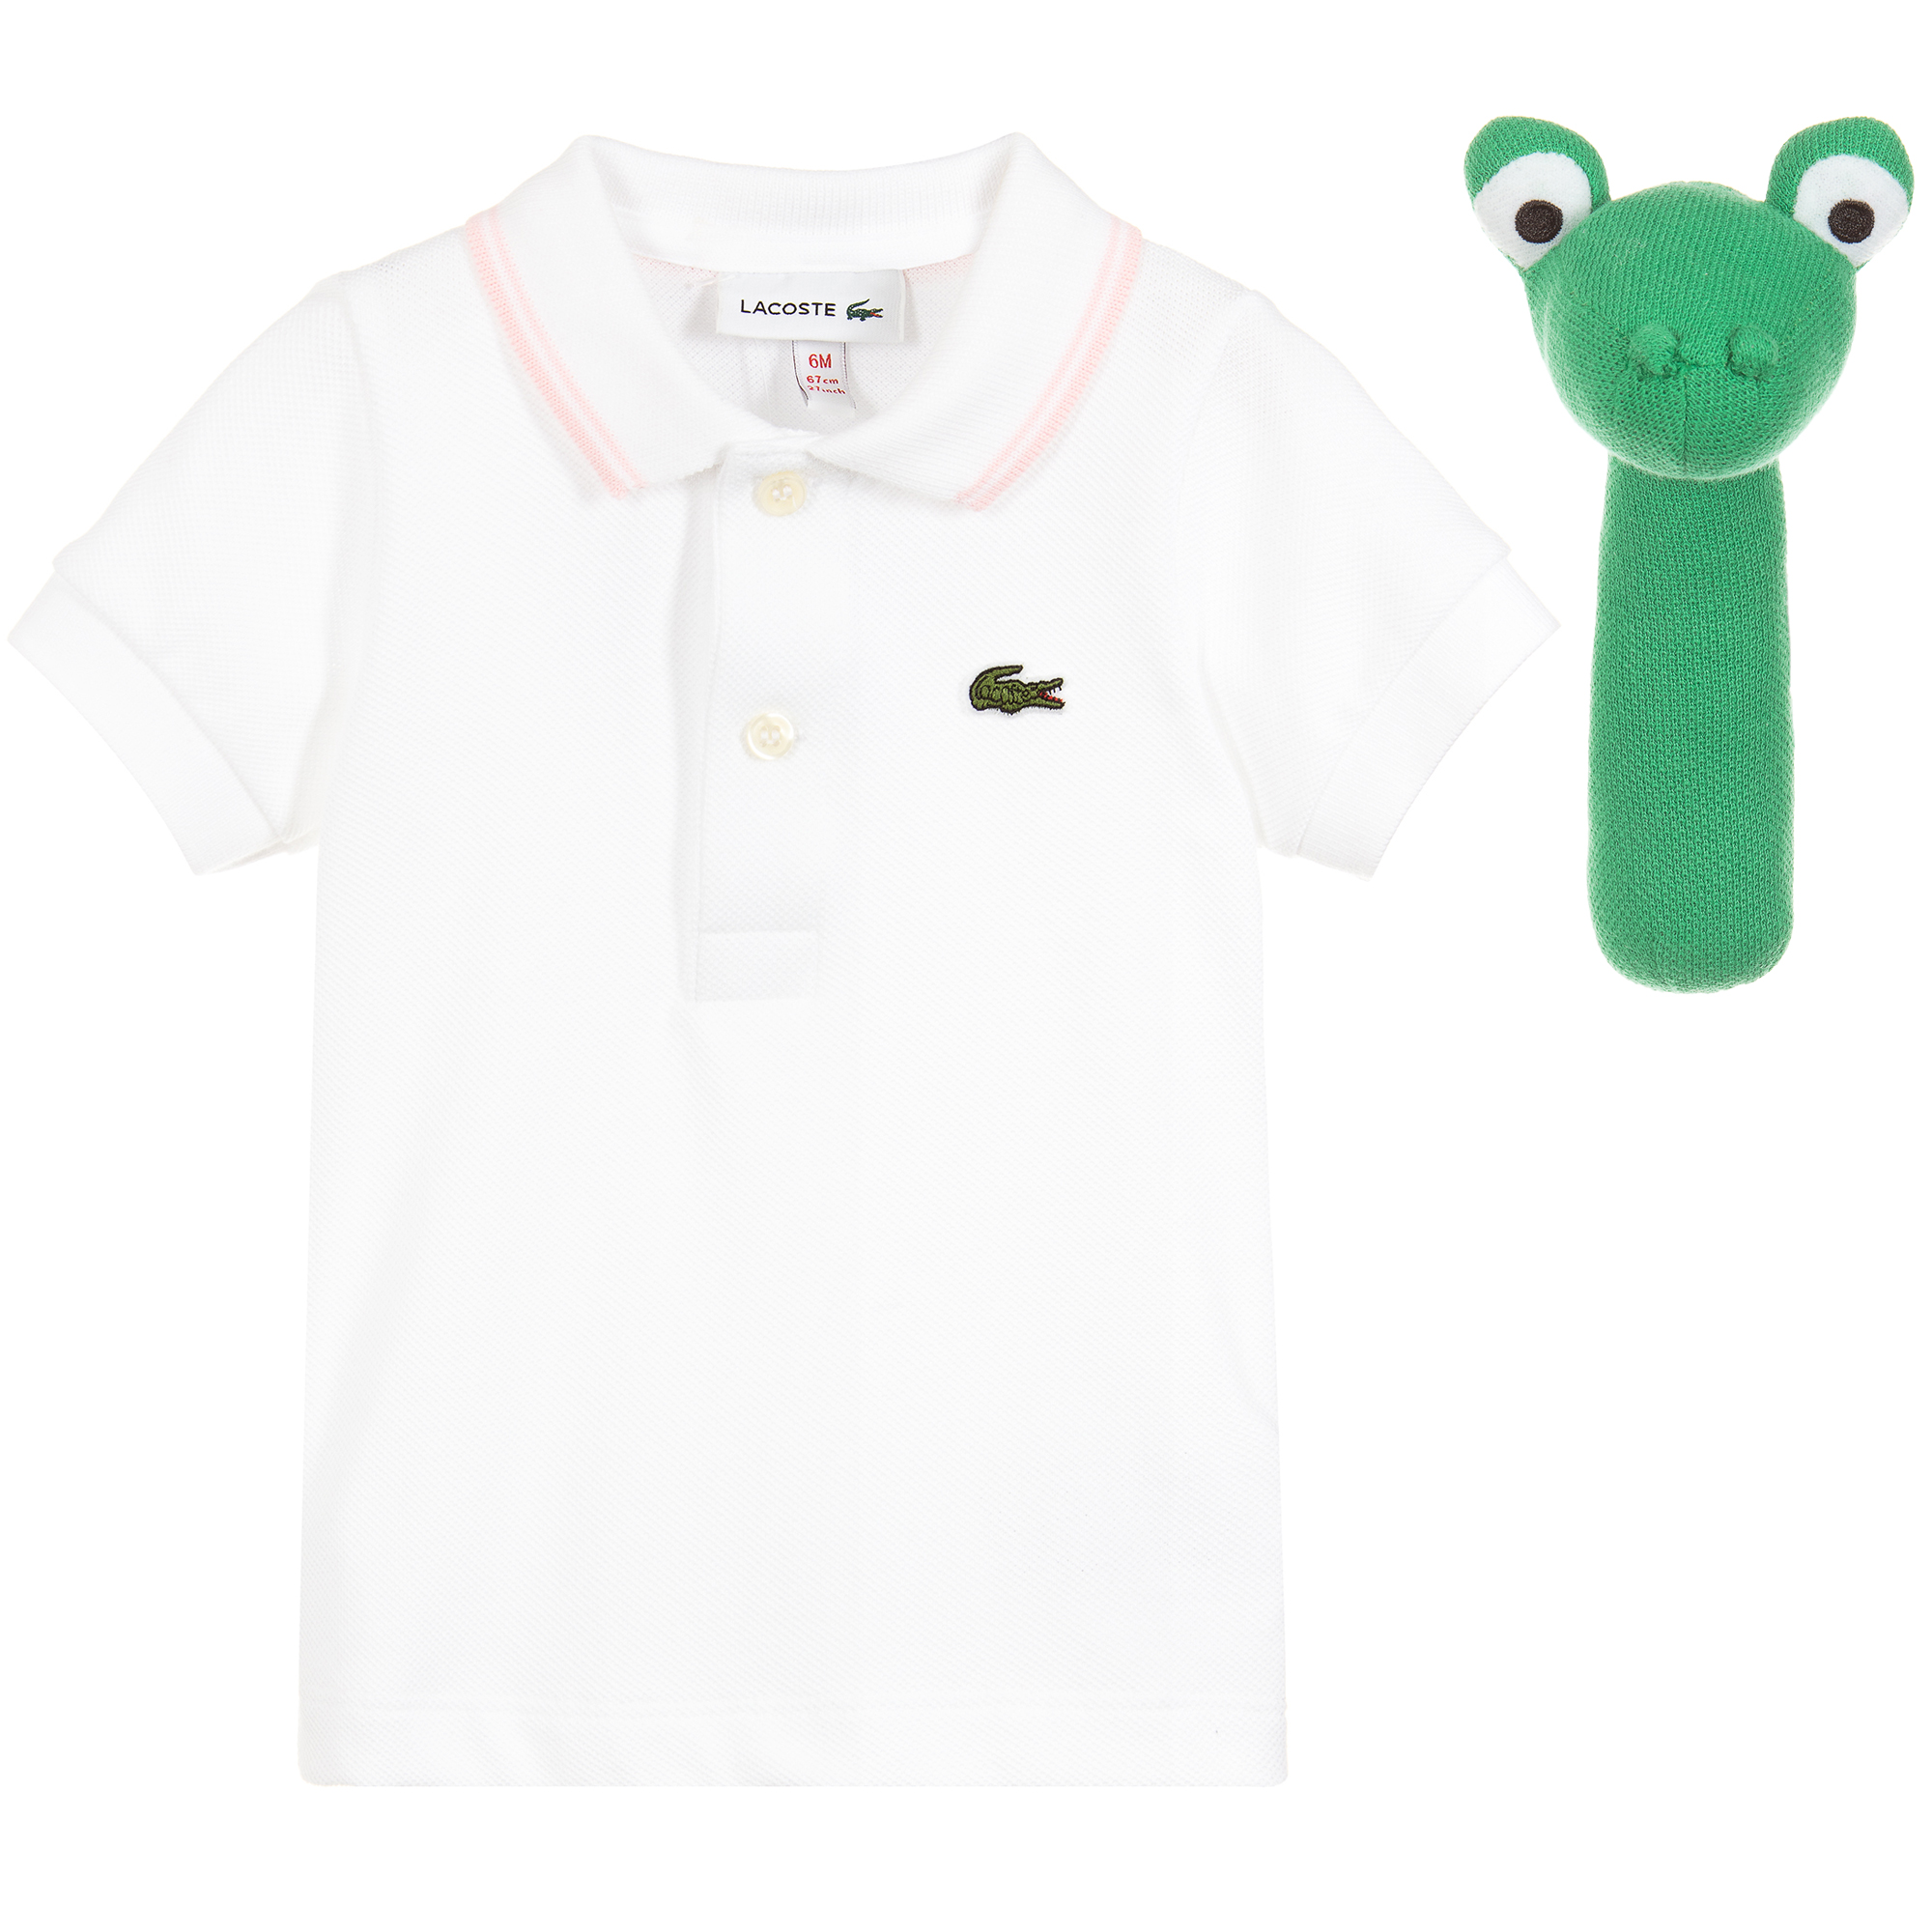 Lacoste - White Polo Shirt Gift Outlet